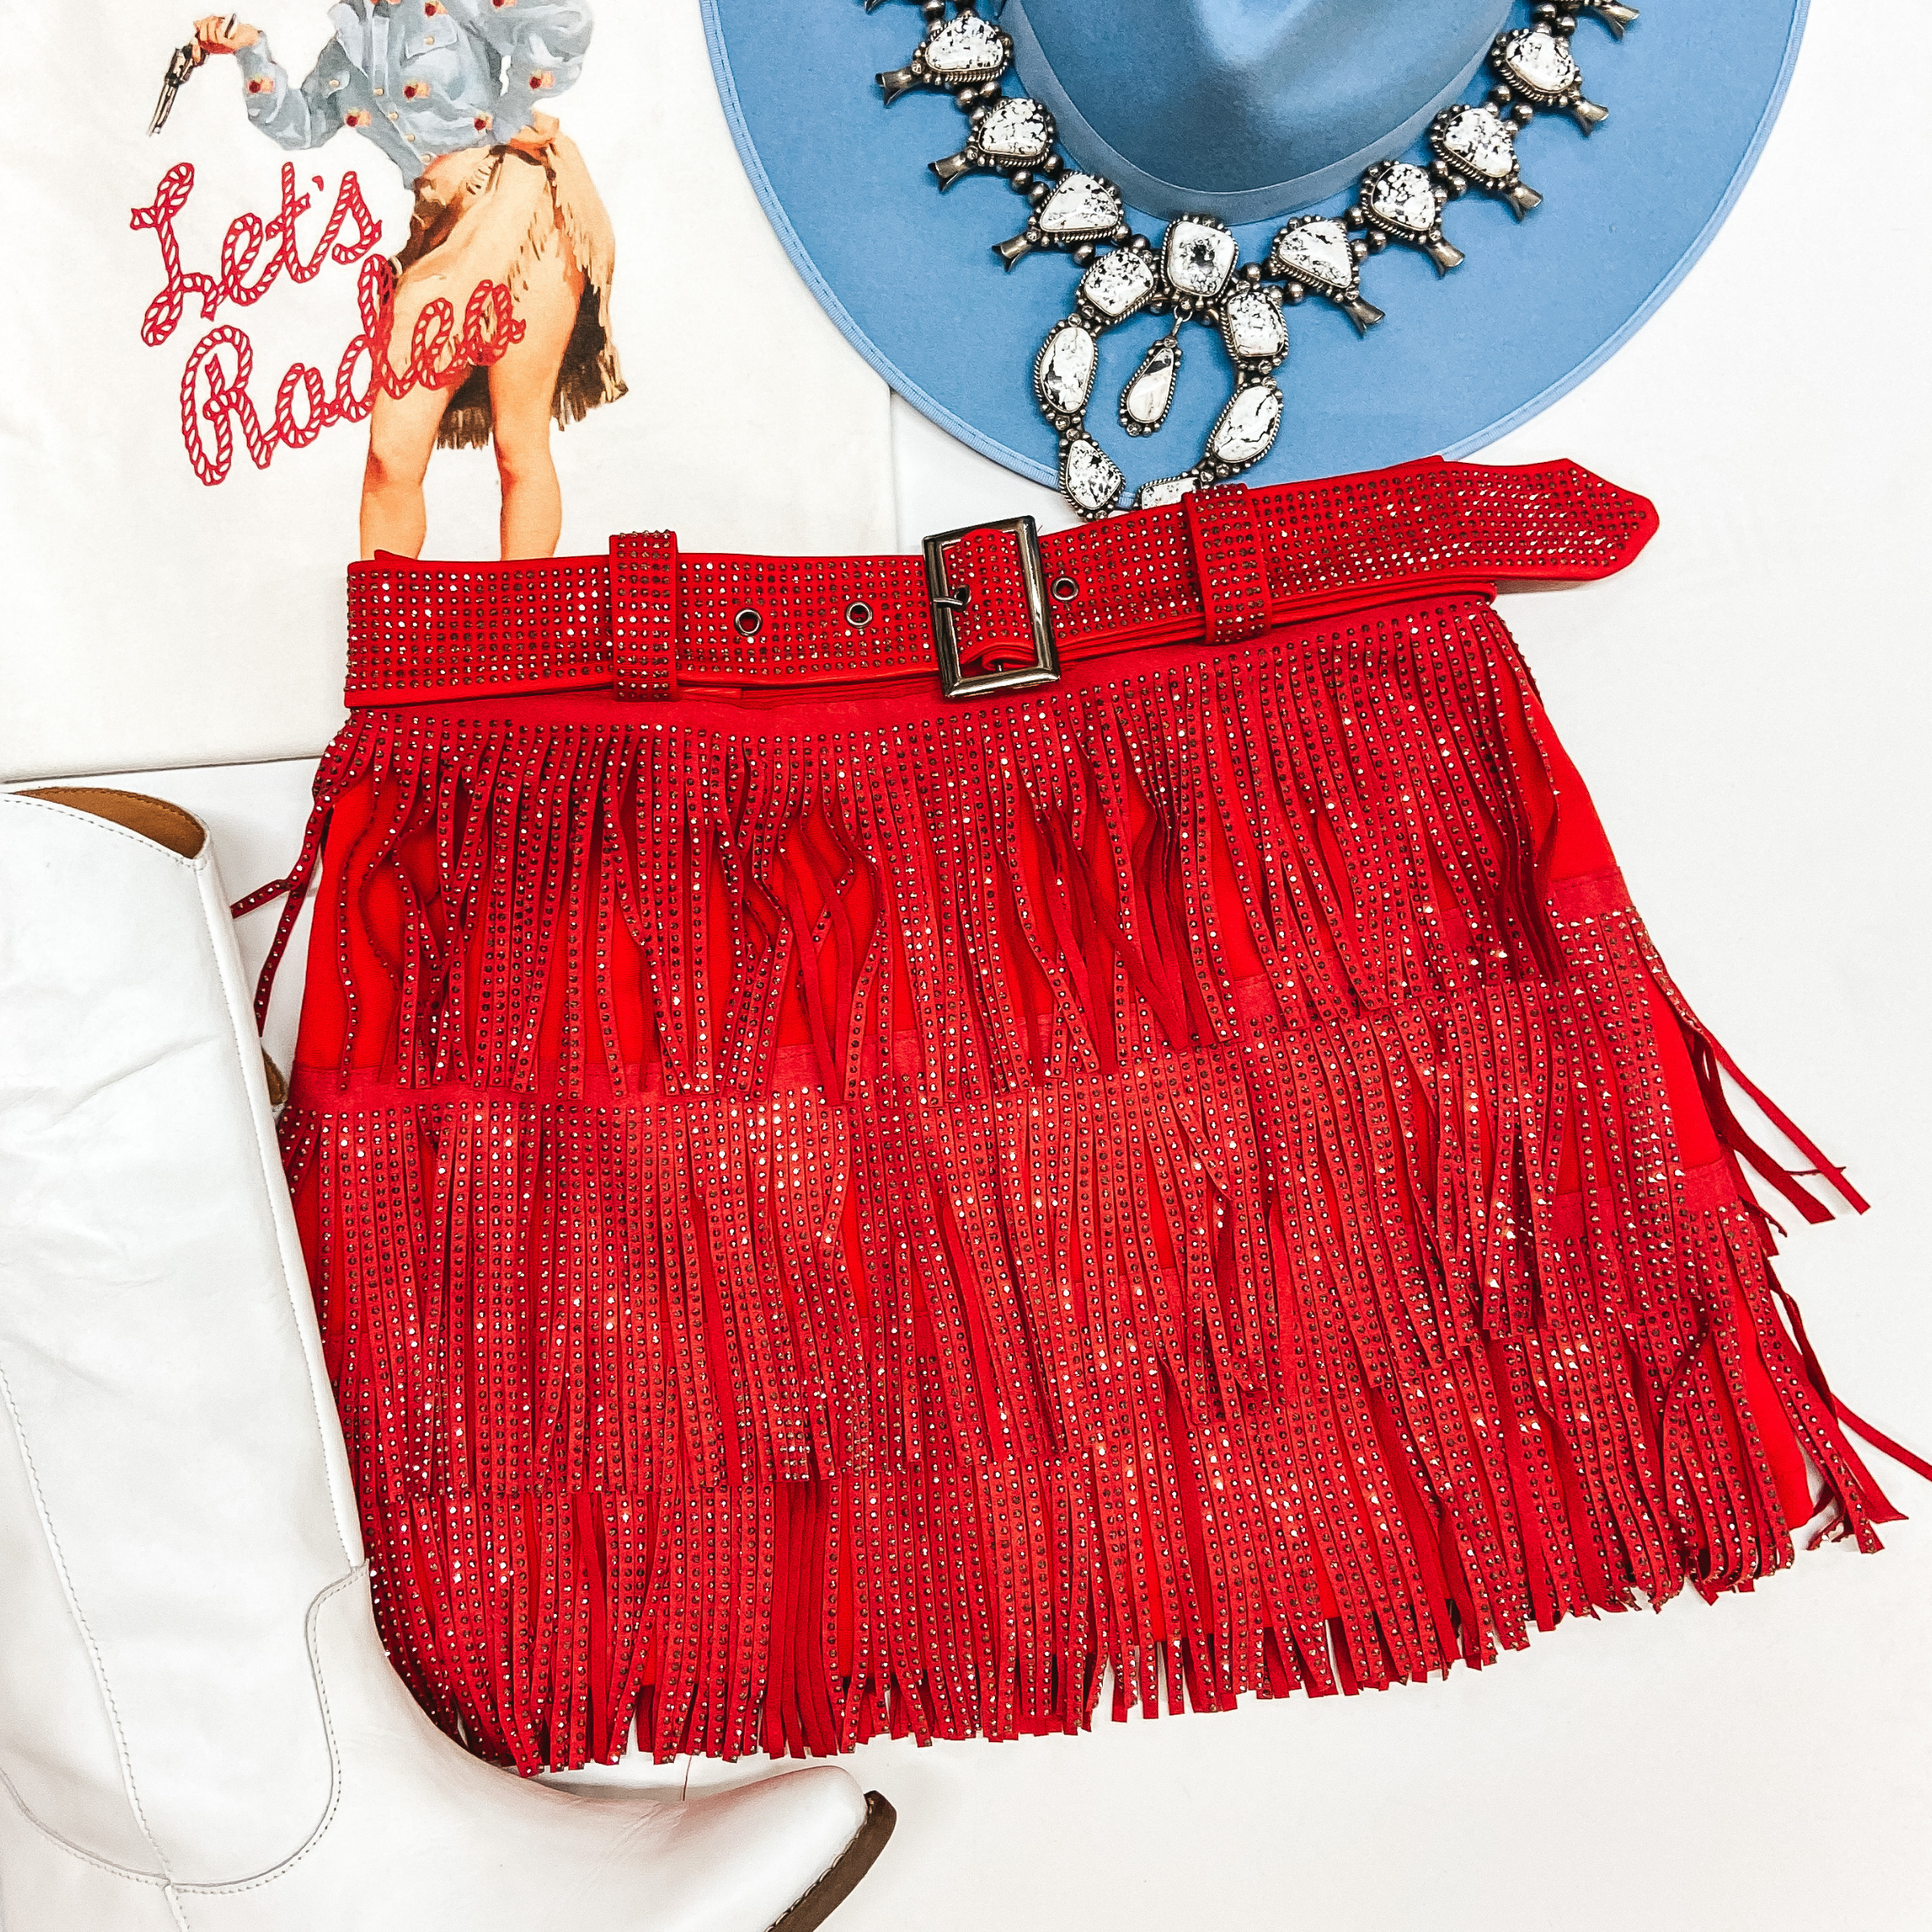 A red fringe crystal skirt with a red crystal belt. Pictured with a white tee shirt, white boots, a blue hat, and white buffalo squash blossom.